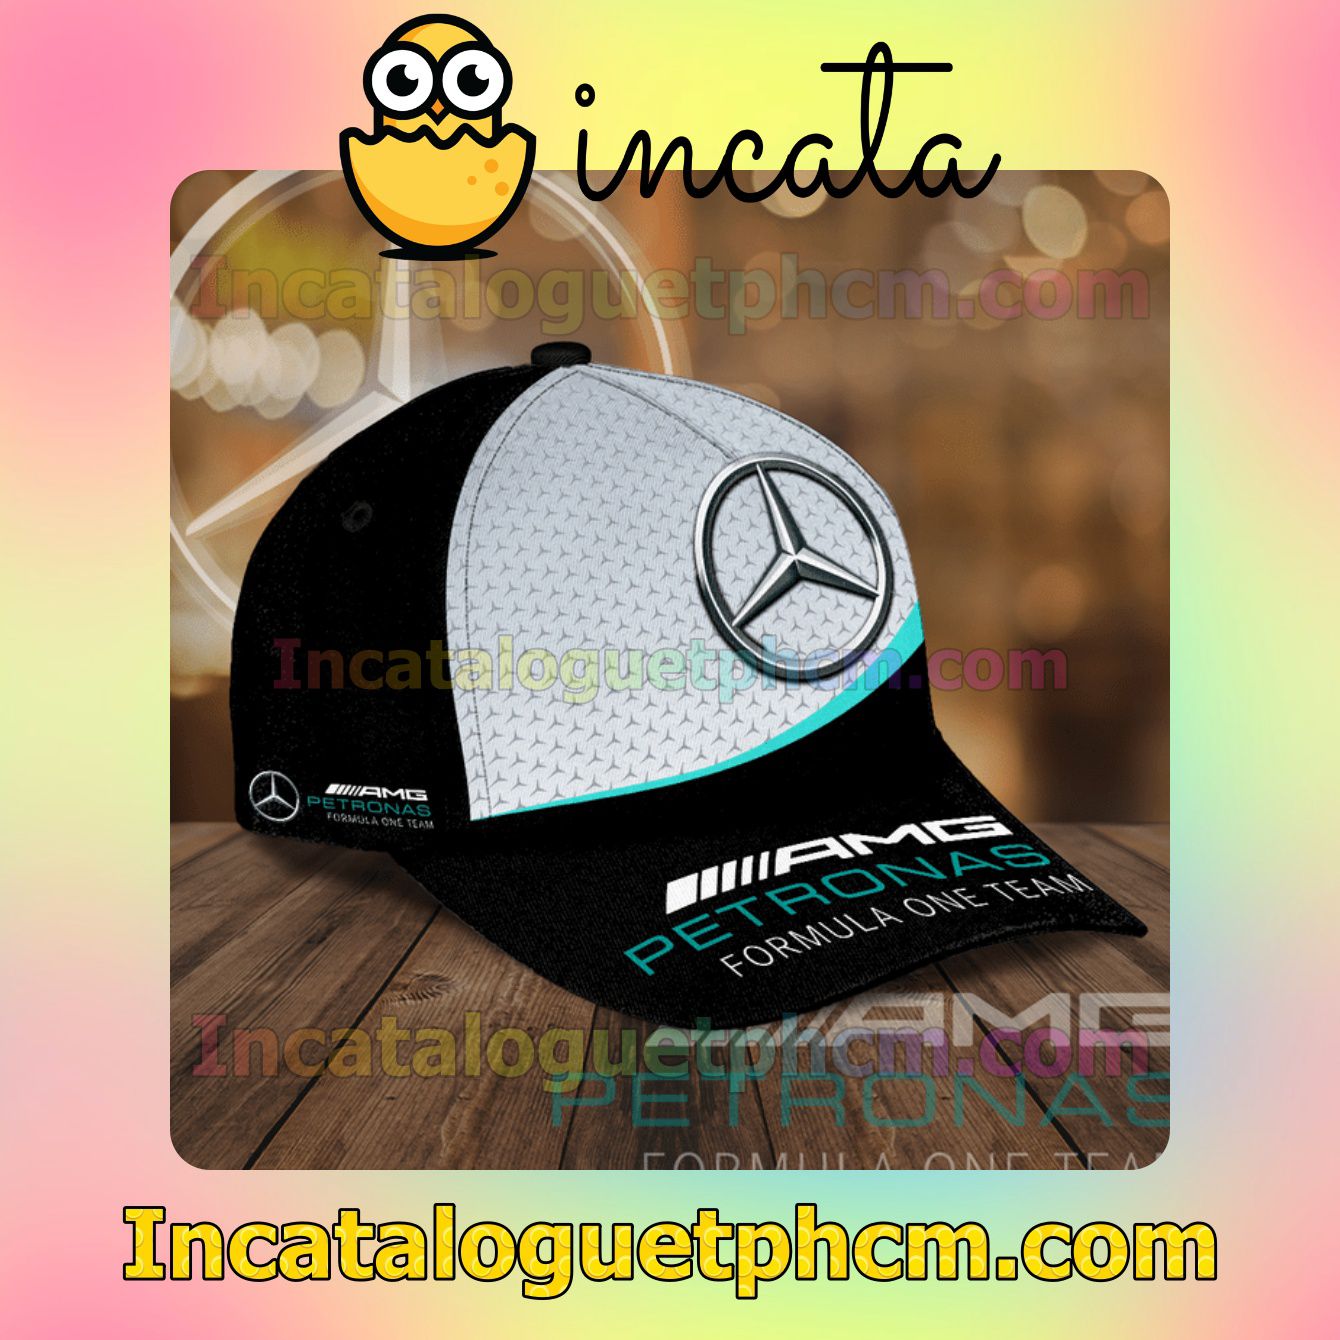 Gorgeous Mercedes Logo Printed Amg Petronas Formula One Team Black And Grey Classic Hat Caps Gift For Men